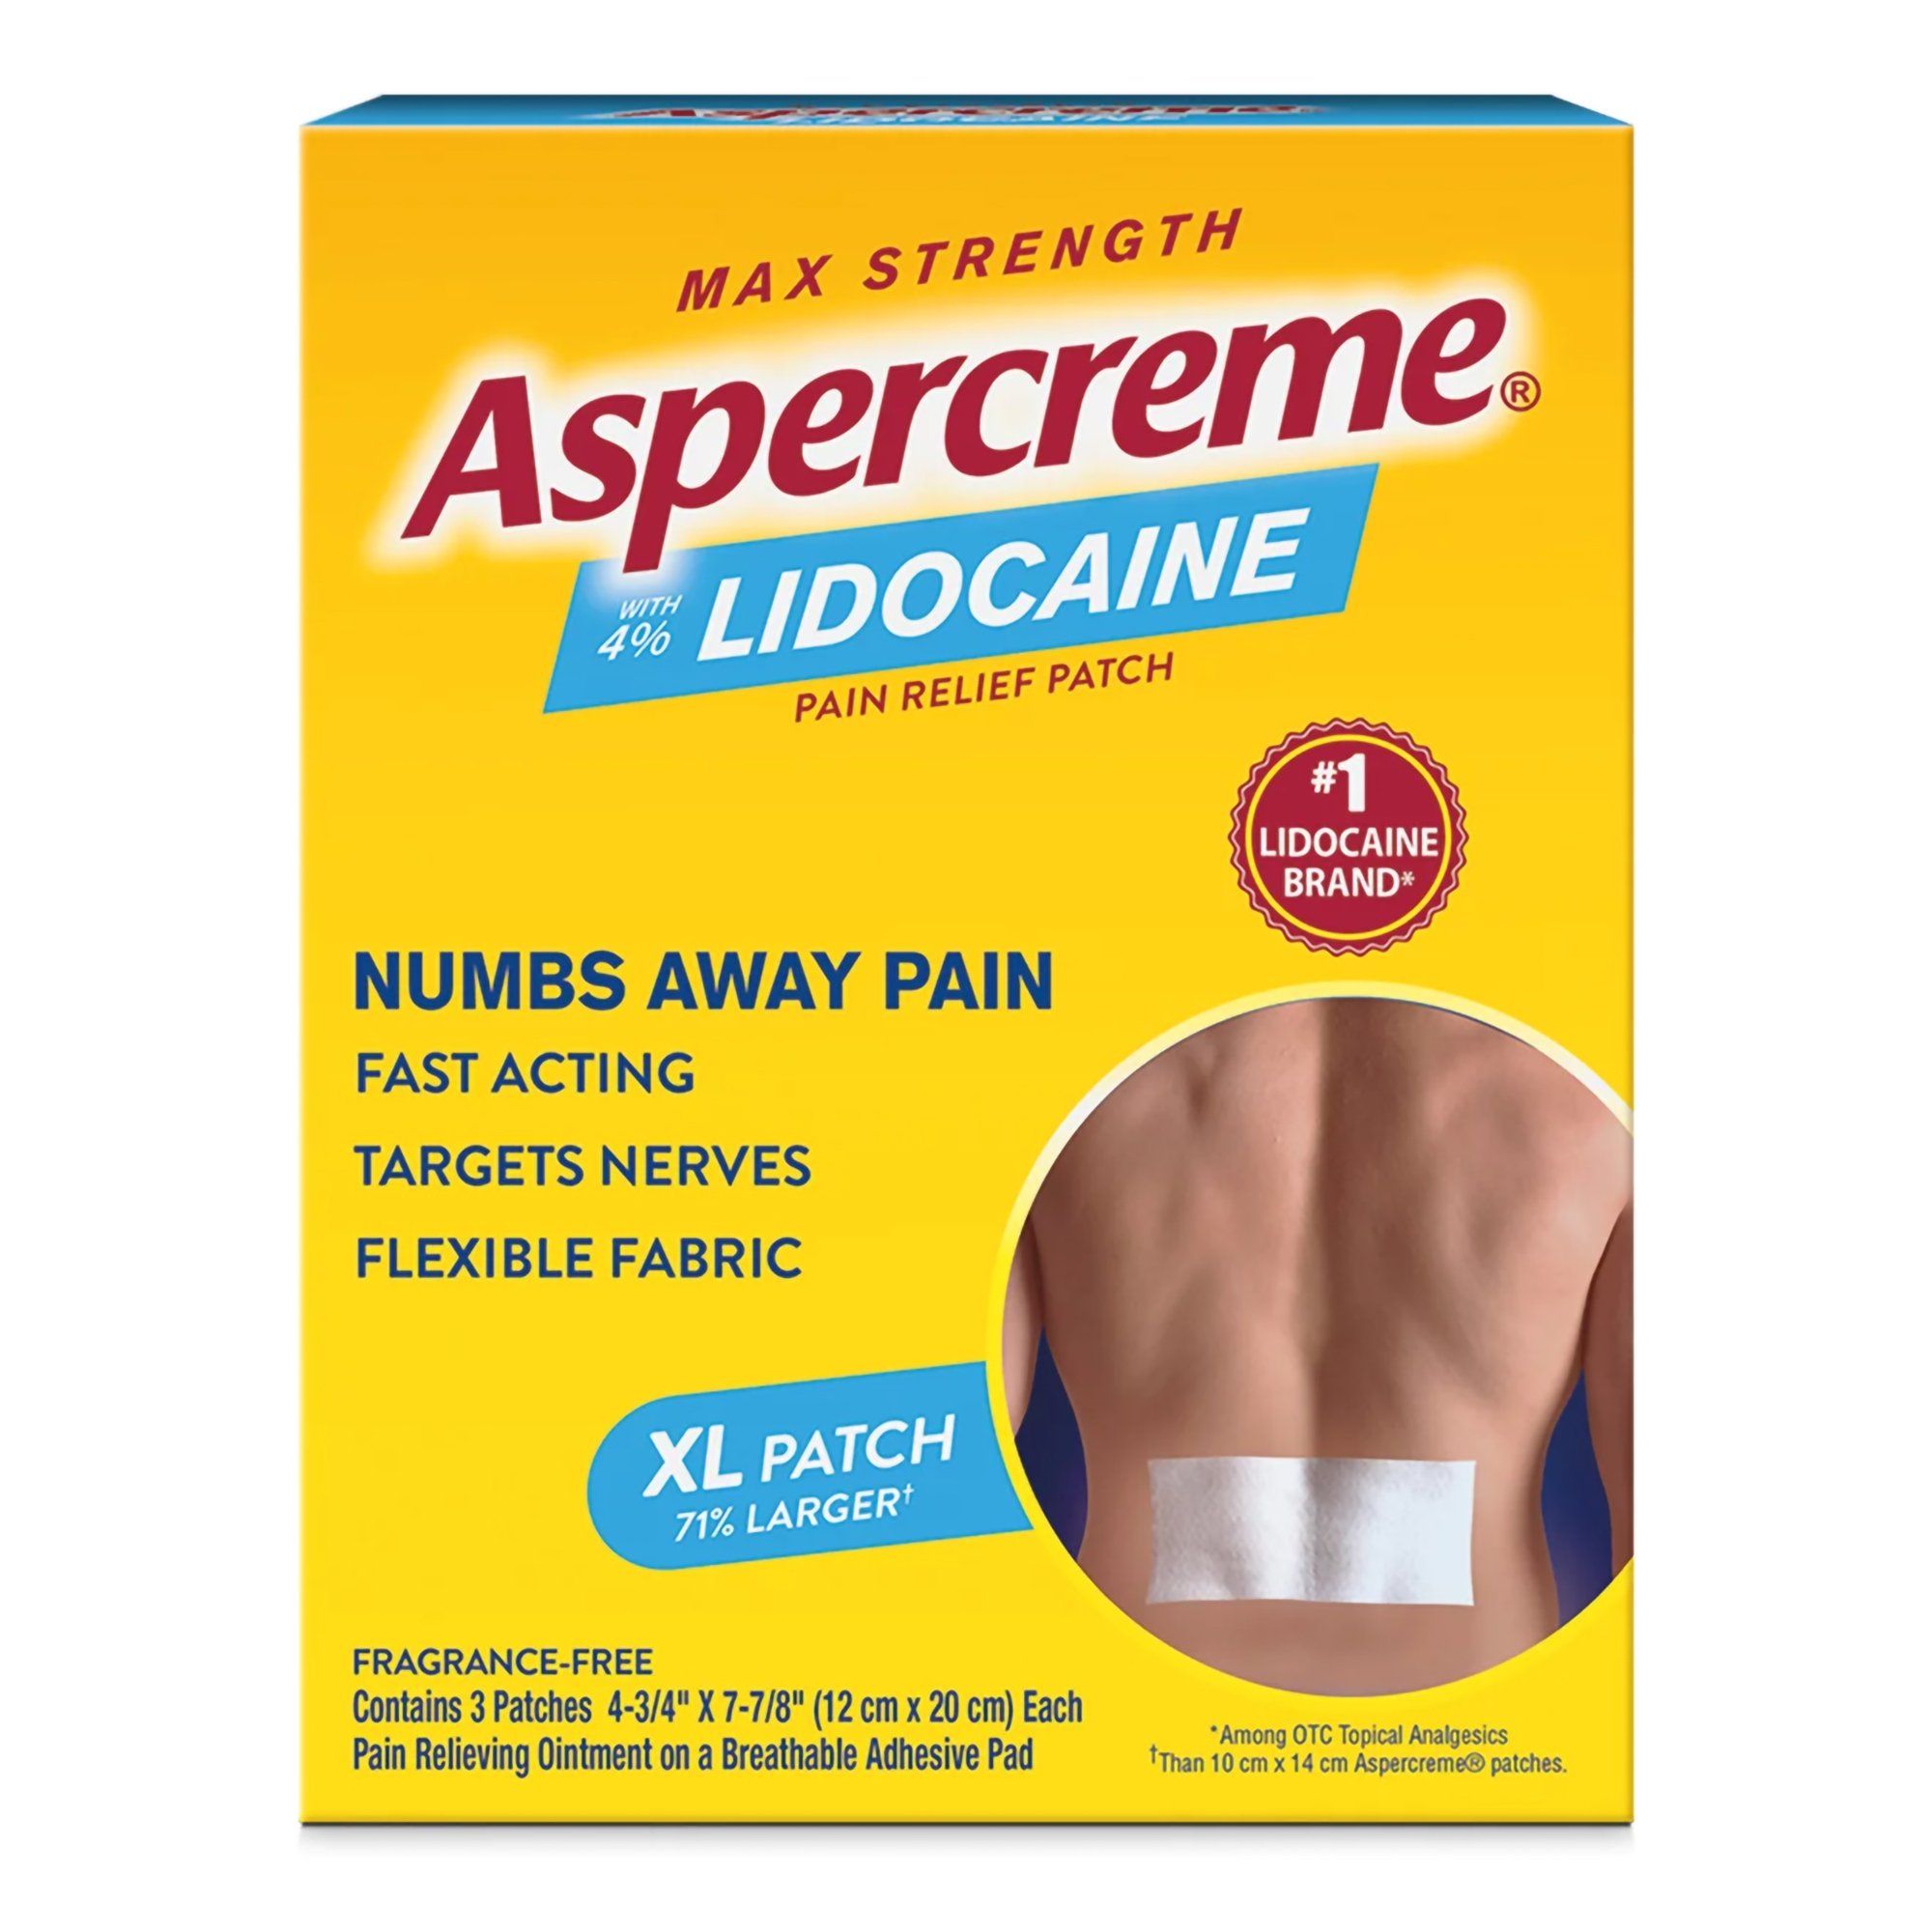 Aspercreme Max Strength 4% Lidocaine Pain Relief Patch, Fragrance Free, XL - 3 ct